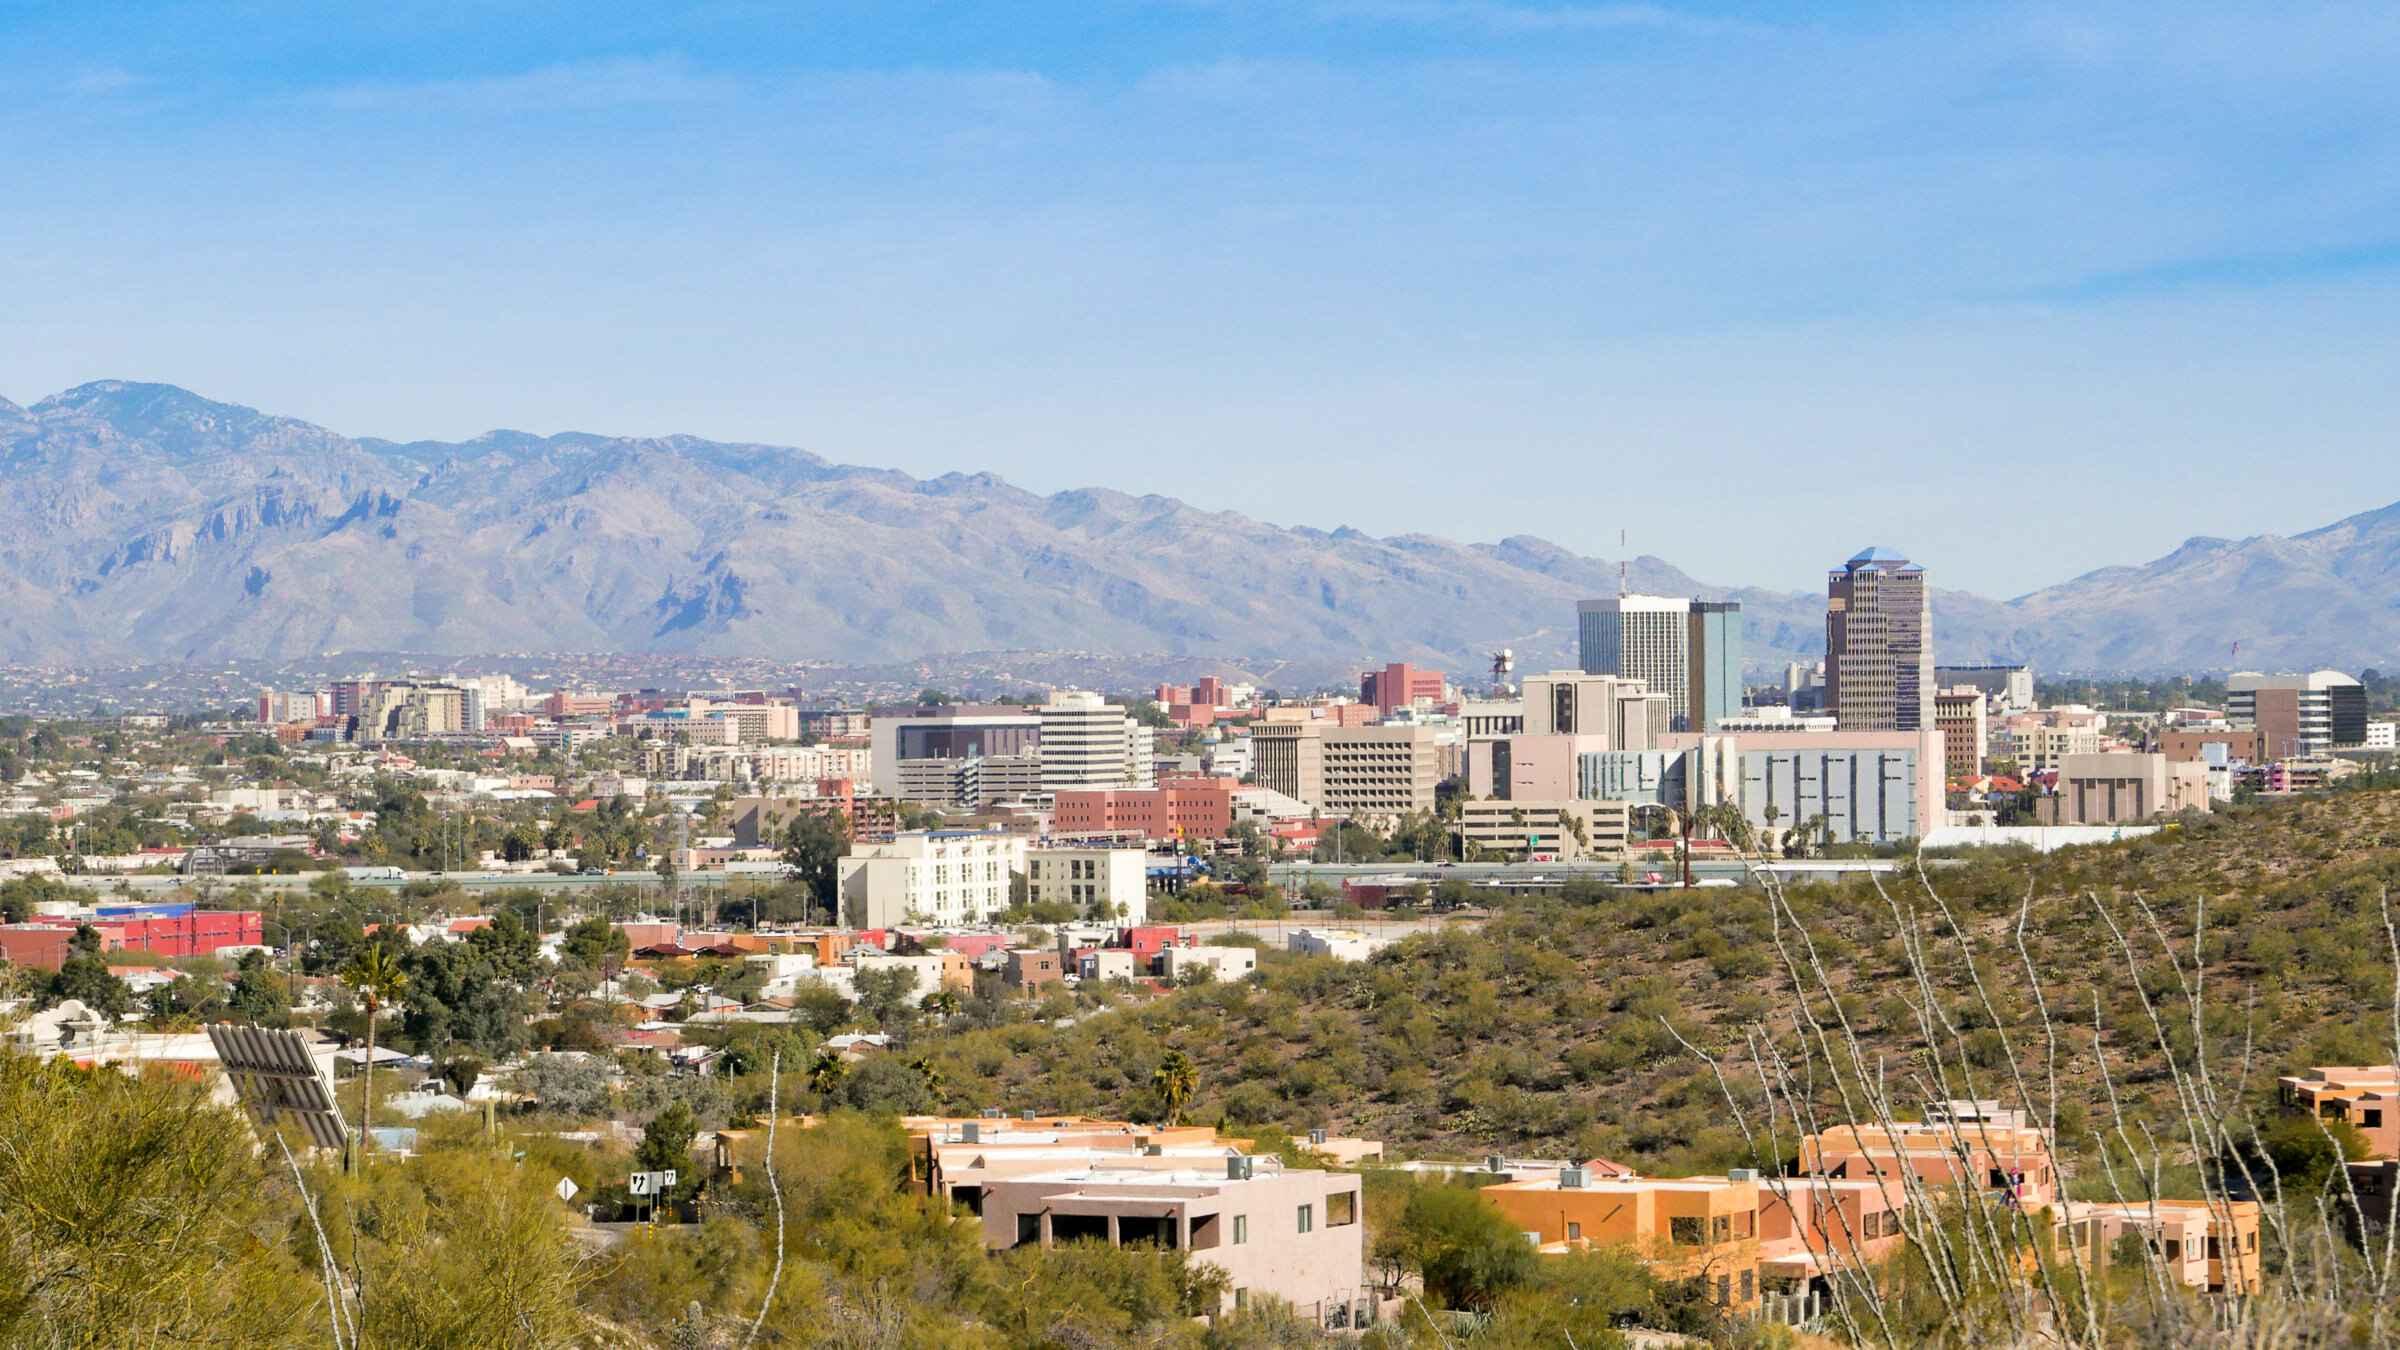 Tucson 2021: Top 10 Tours & Activities (with Photos) - Things to Do in ...